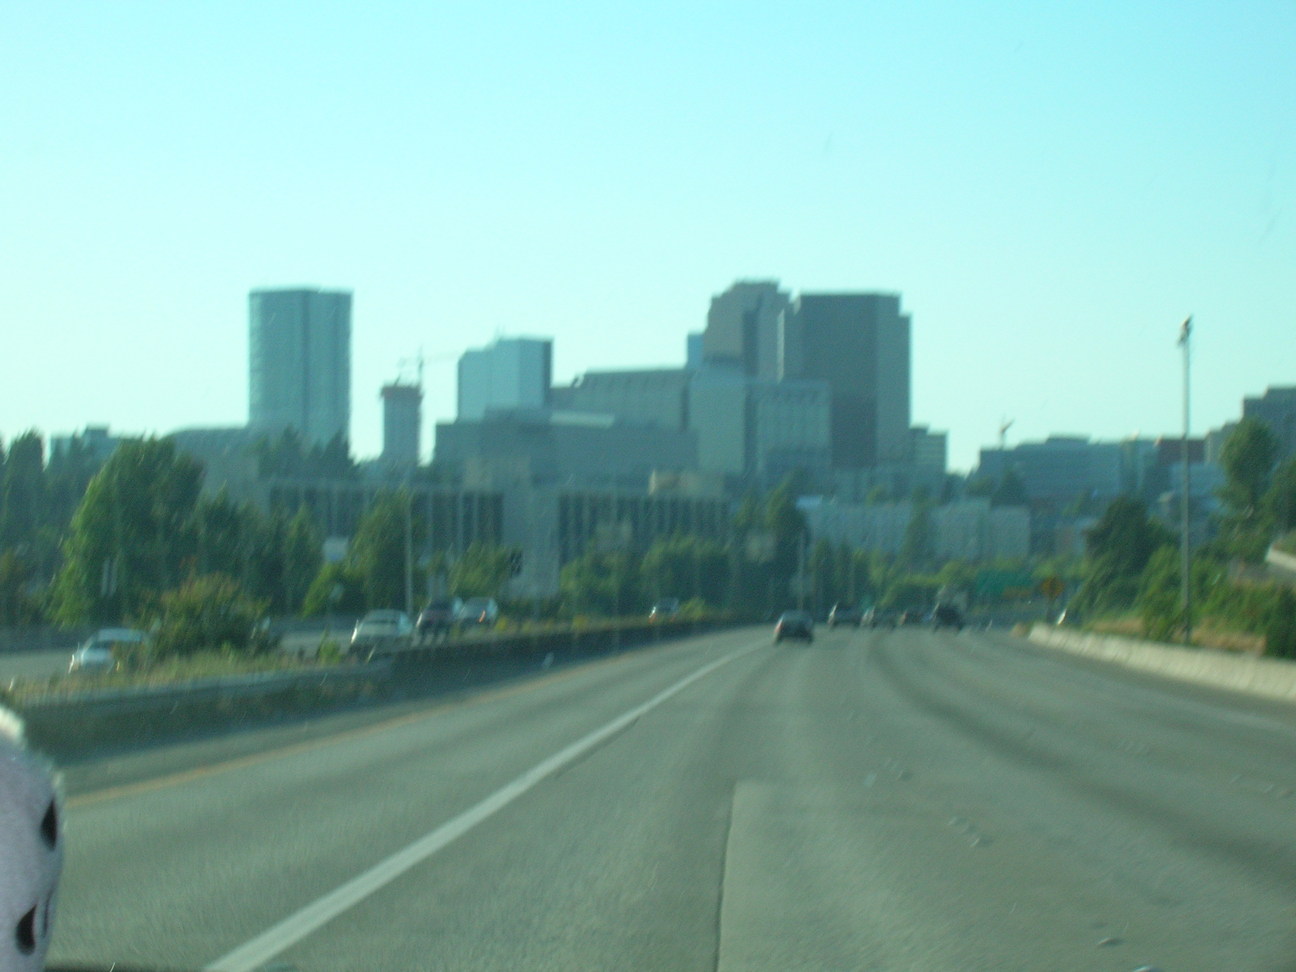 Bellevue, WA: Sadly a blurry picture from early July 2006 of Bellevue, Washington.